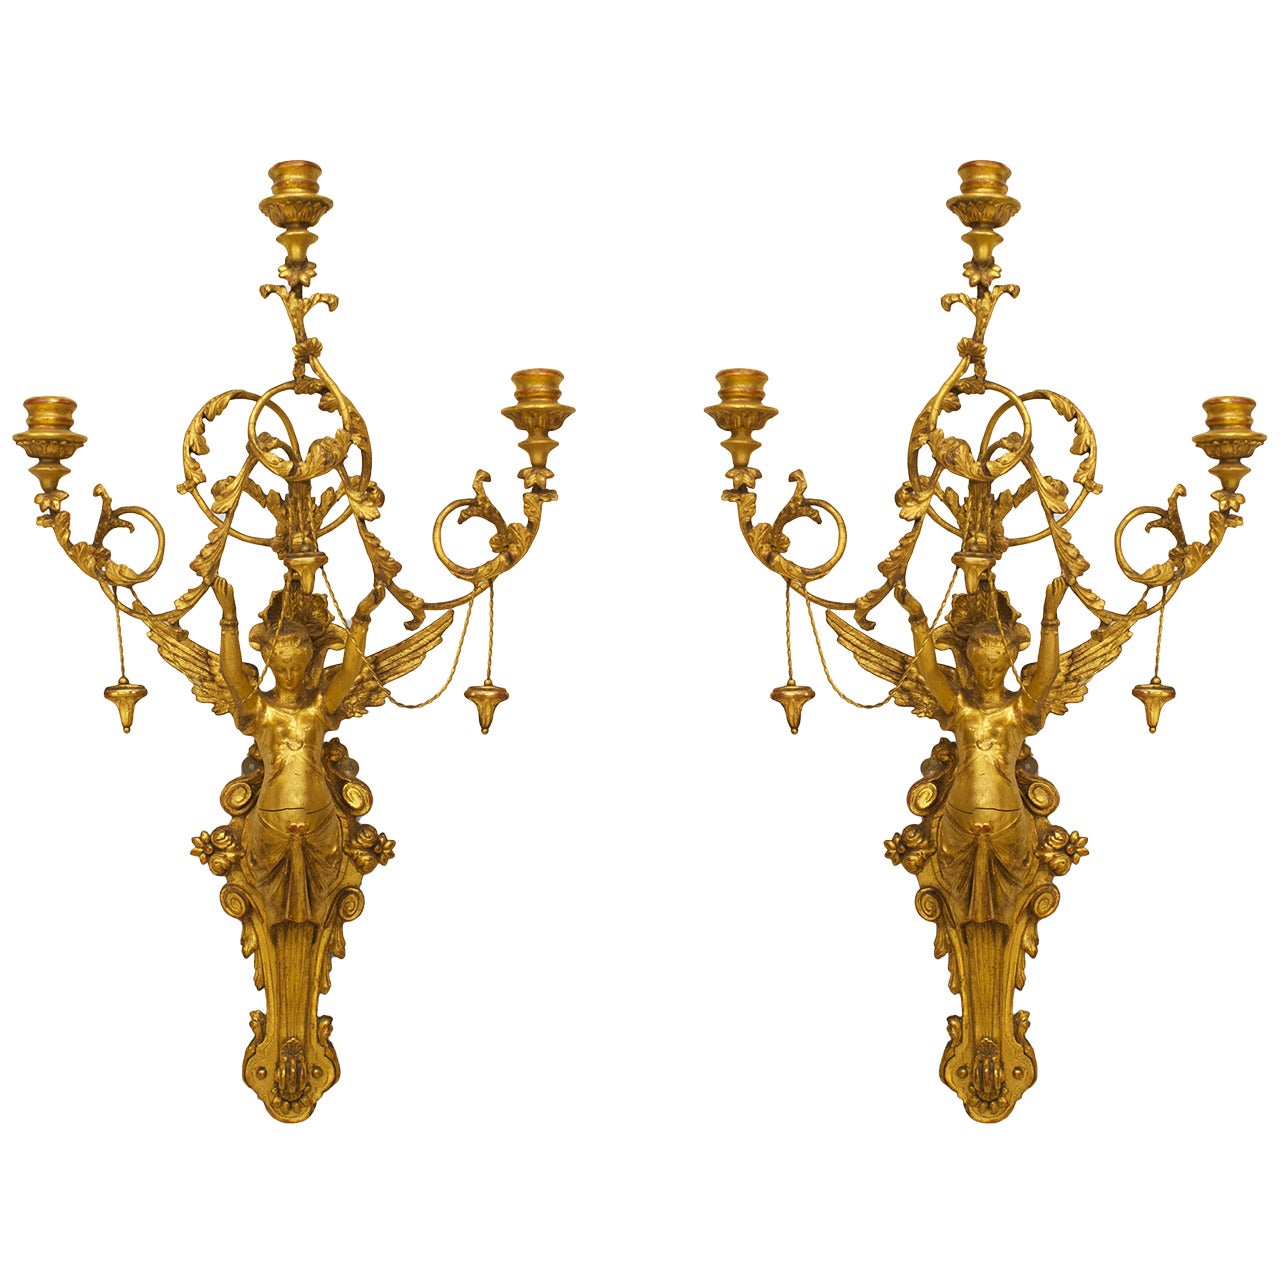 Pair of Italian Neoclassic Empire Gilt Wood Wall Sconces For Sale